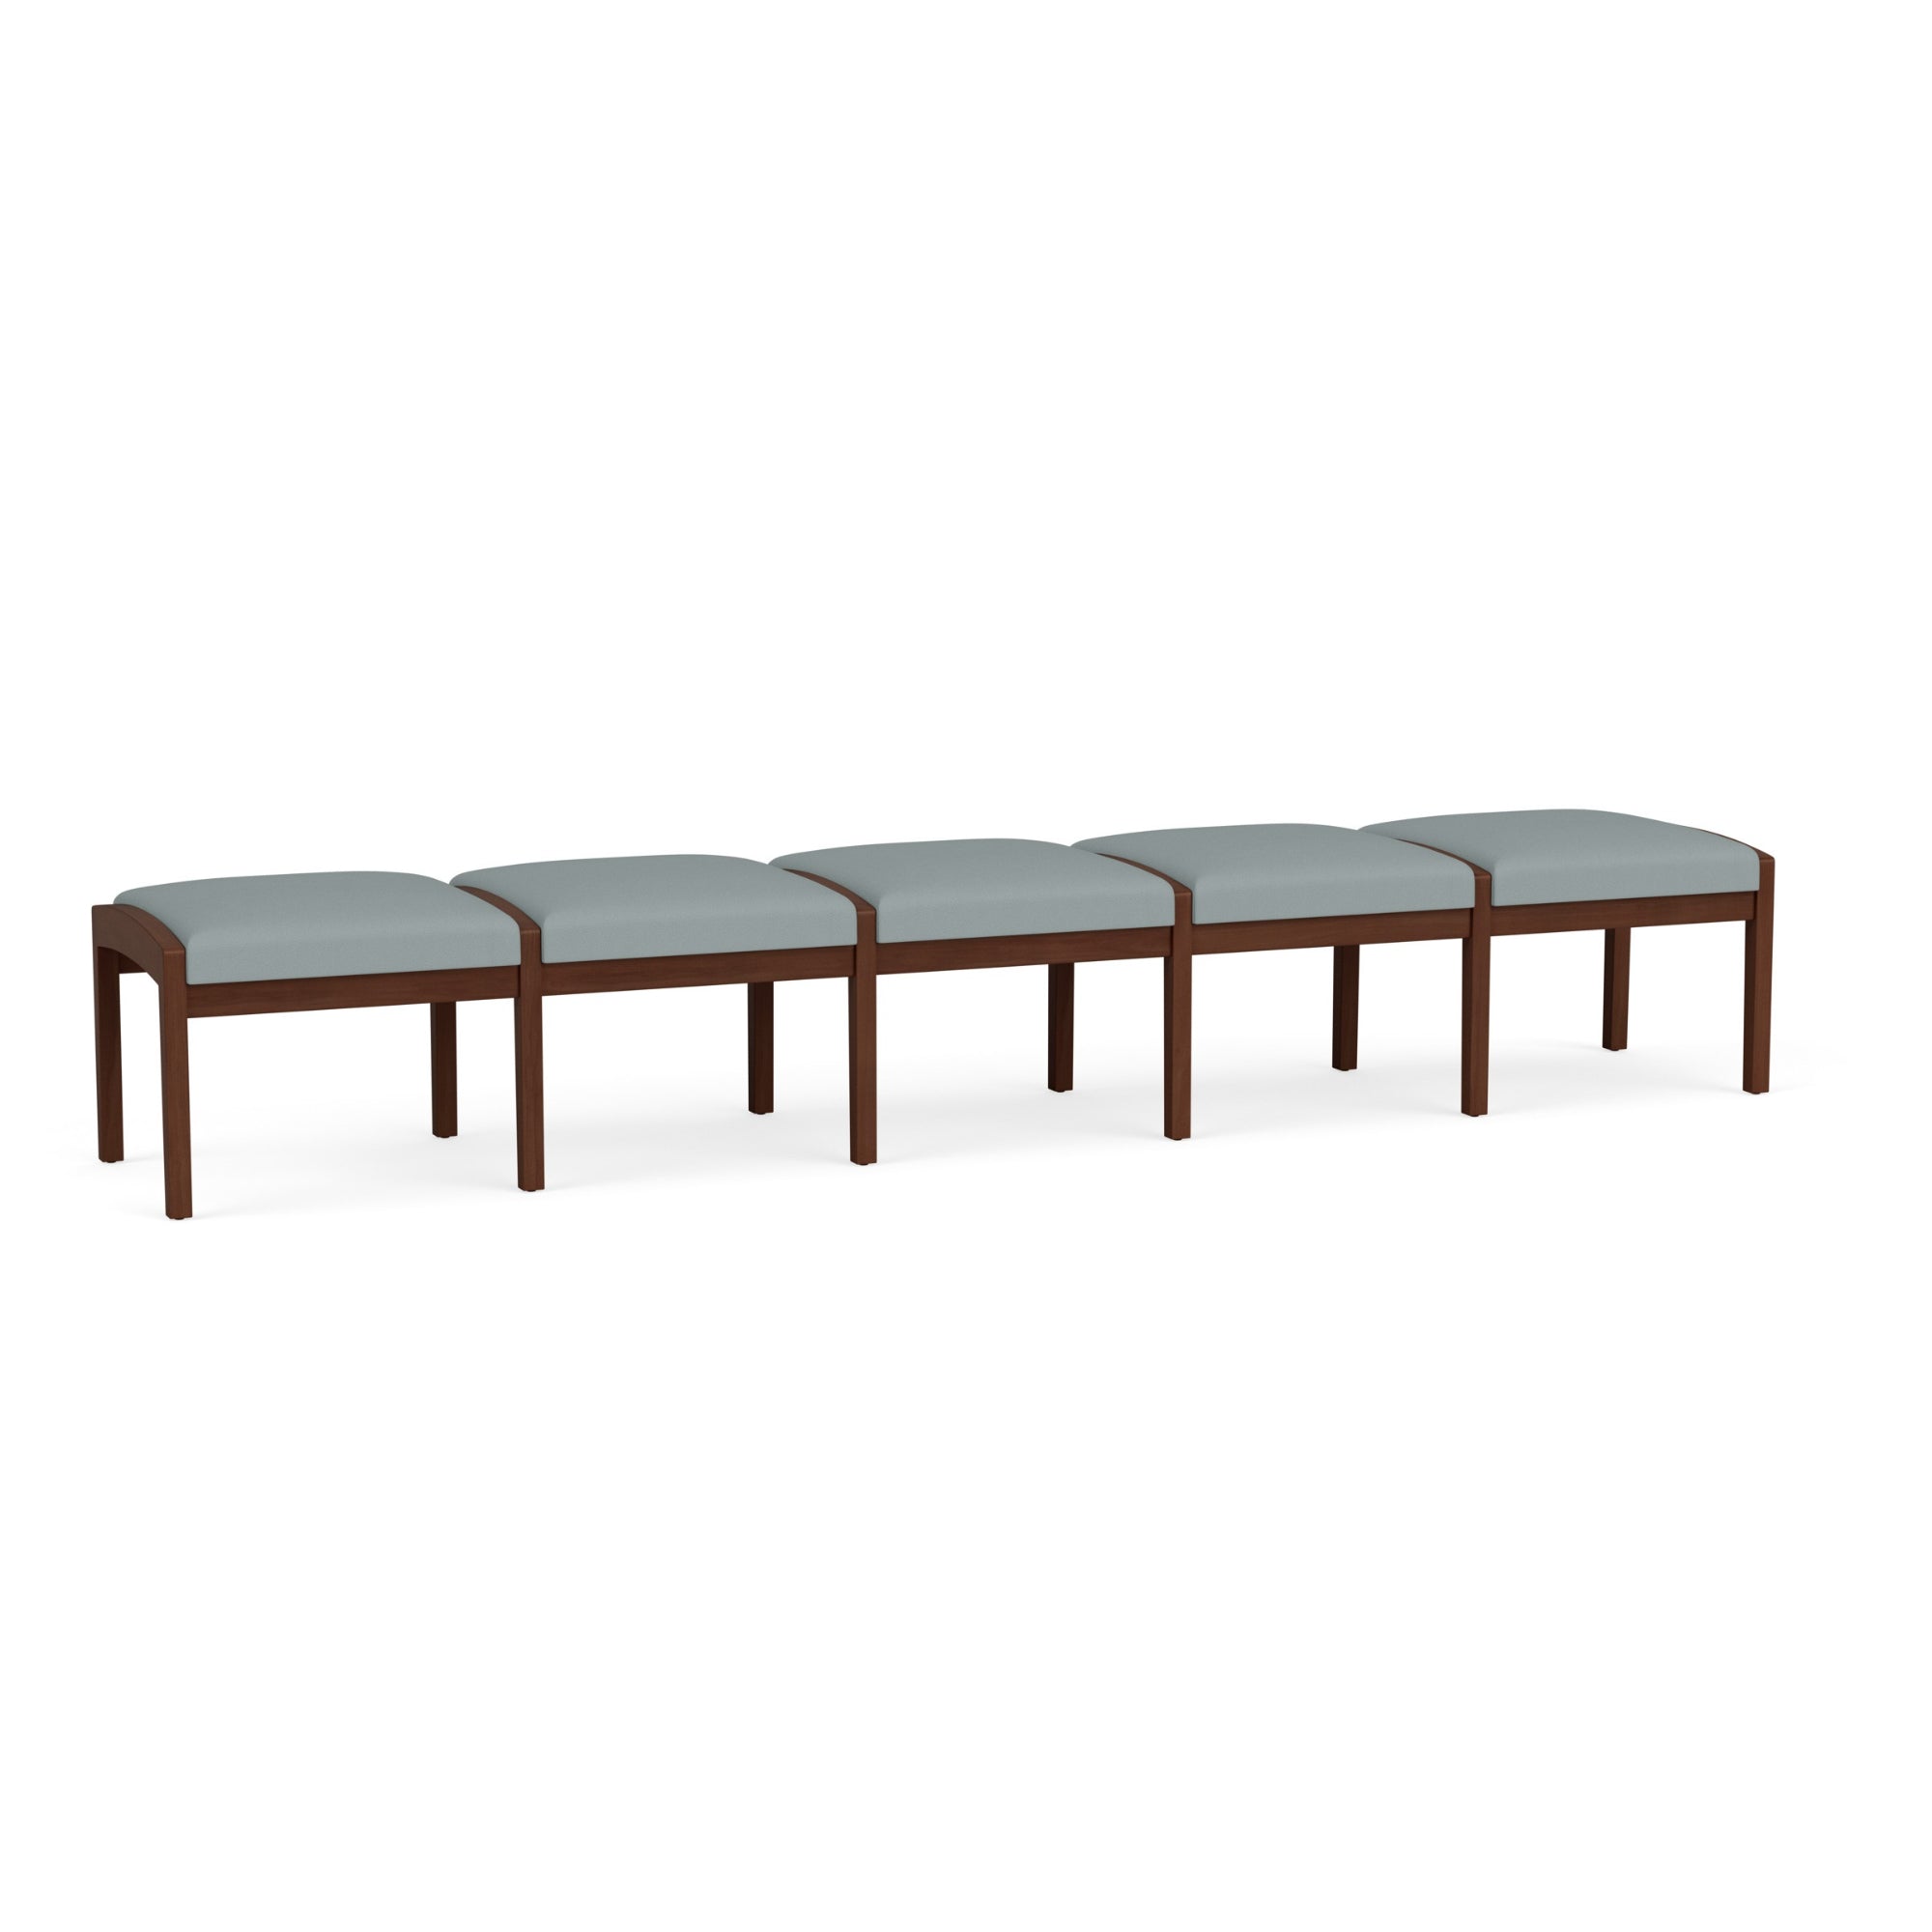 Lenox Wood Collection Reception Seating, 5 Seat Bench, Standard Fabric Upholstery, FREE SHIPPING